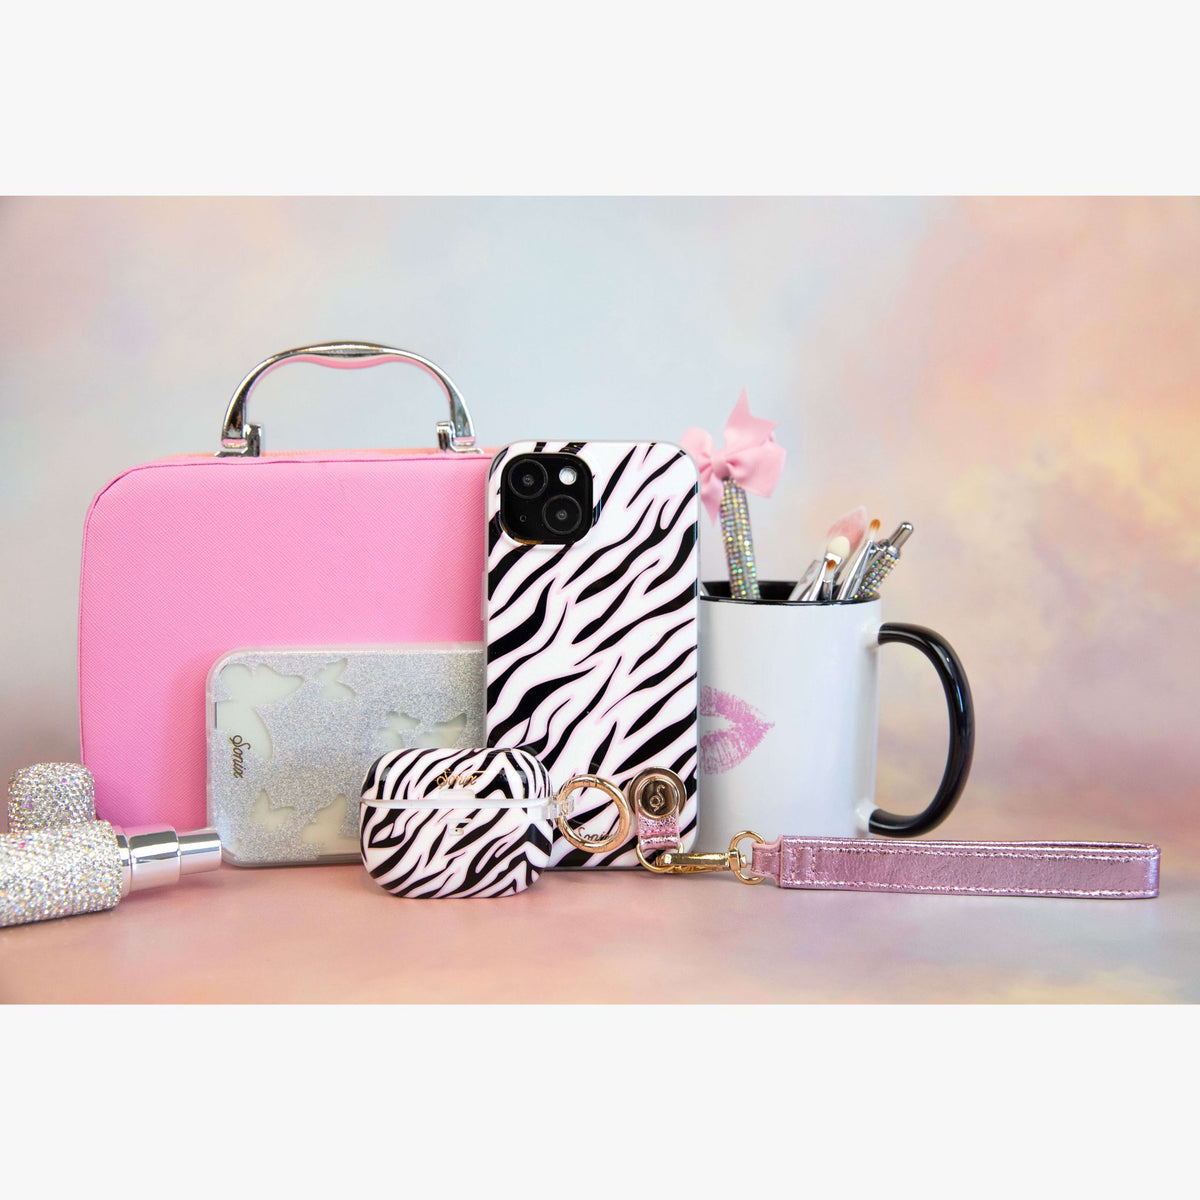  Small Cosmetic Bag Cute Makeup Bag Y2k Accessories Aesthetic Make  Up Bag Y2k Purse Cosmetic Bag for Purse (white) : Beauty & Personal Care